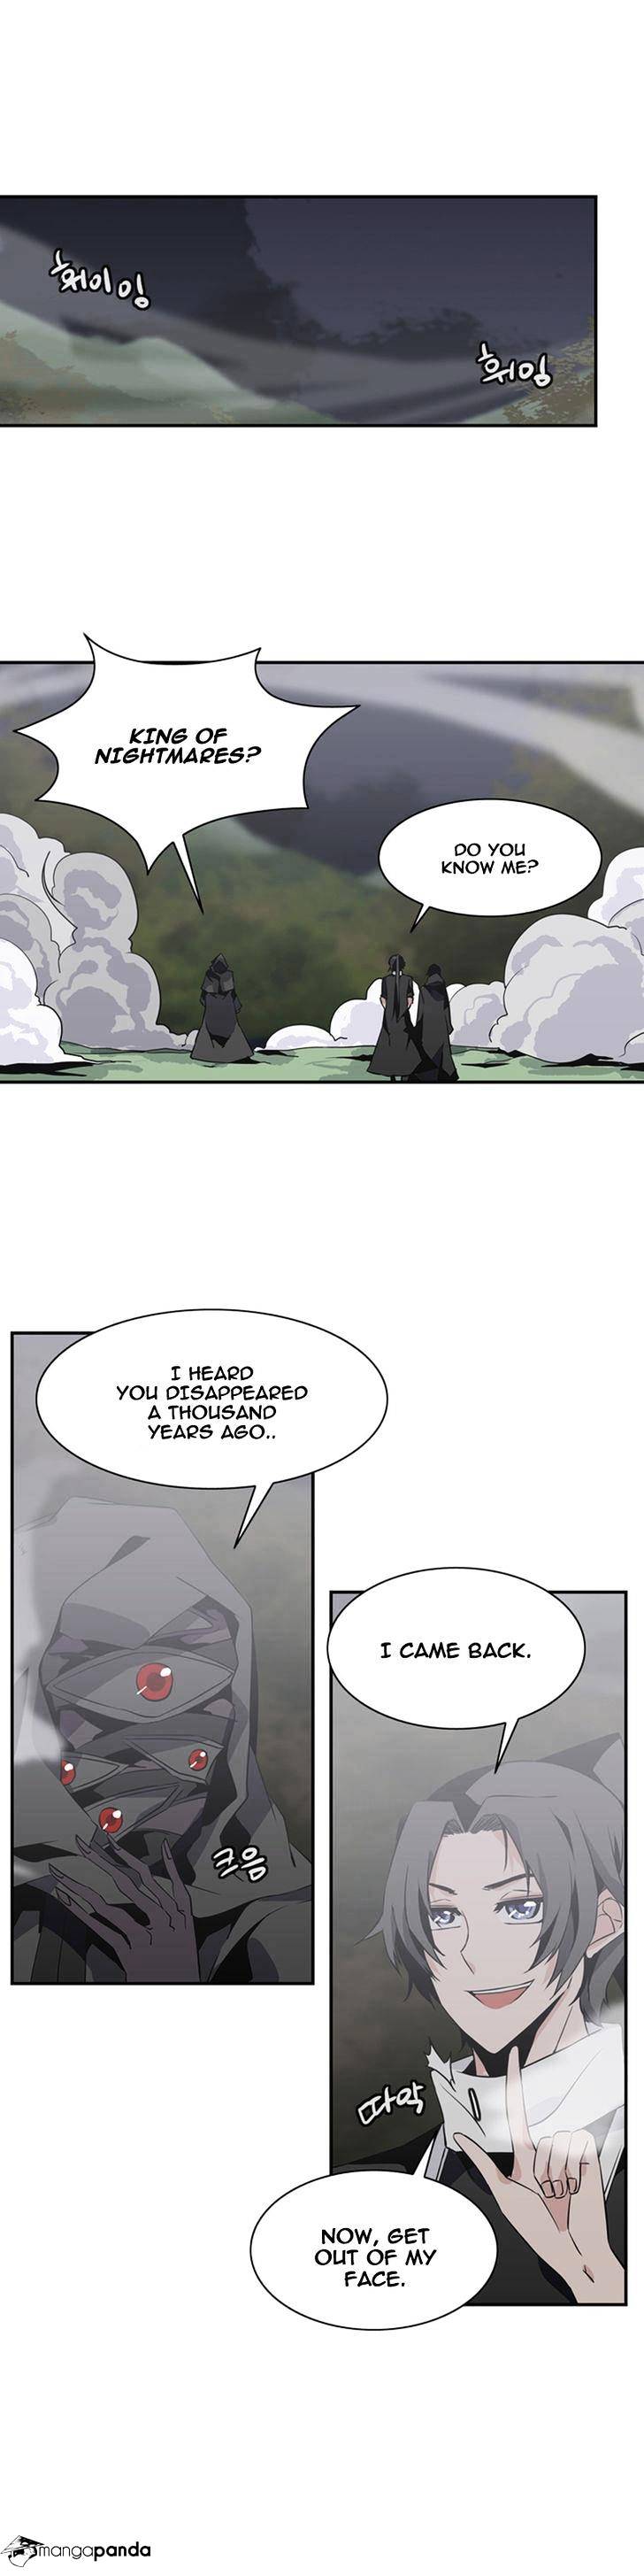 Wizardly Tower - Chapter 62 Page 2